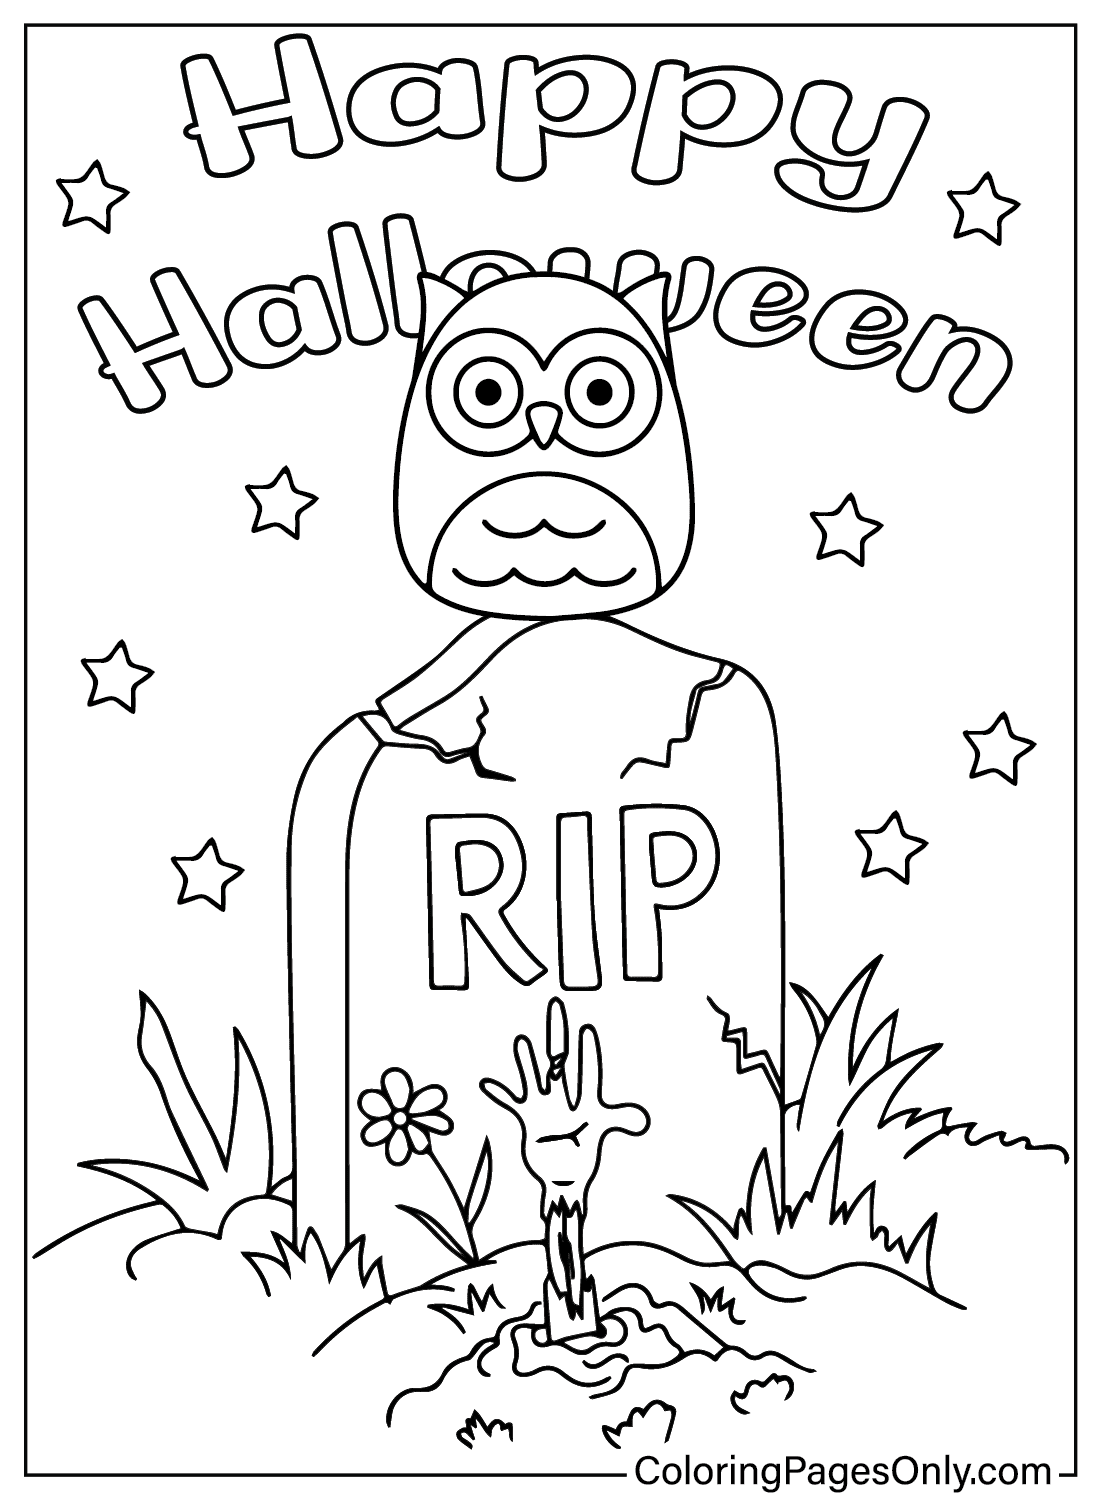 Squishmallow Halloween Coloring Sheet for Kids from Squishmallow Halloween